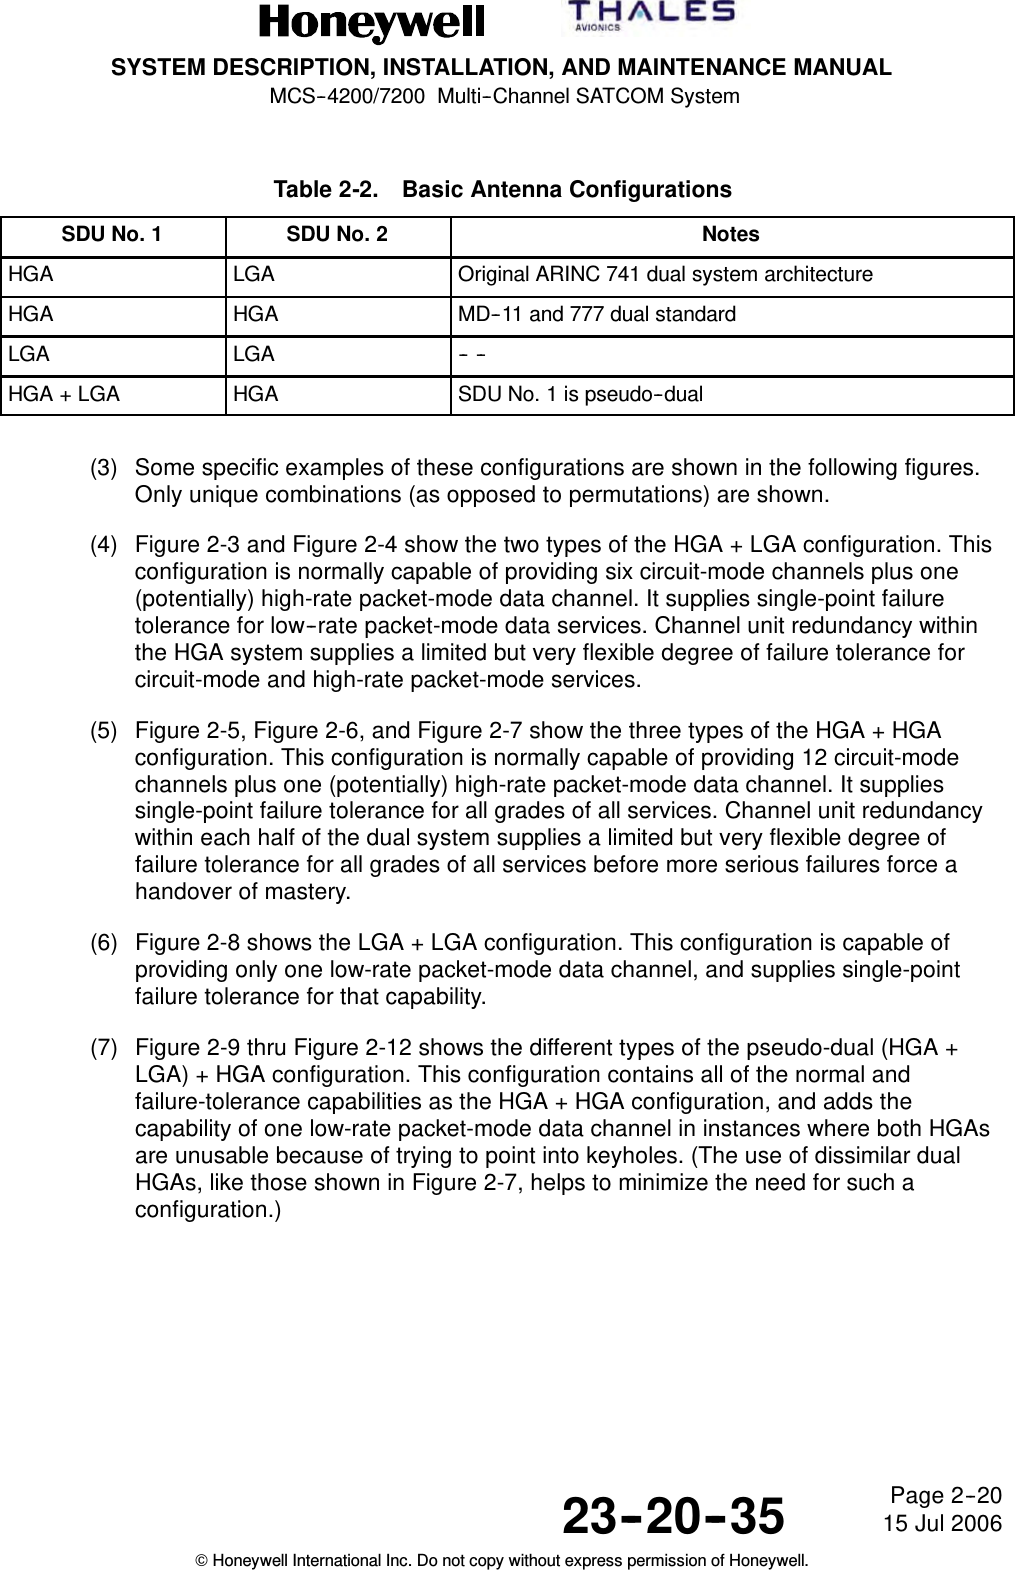 SYSTEM DESCRIPTION, INSTALLATION, AND MAINTENANCE MANUALMCS--4200/7200 Multi--Channel SATCOM System23--20--35 15 Jul 2006Honeywell International Inc. Do not copy without express permission of Honeywell.Page 2--20Table 2-2. Basic Antenna ConfigurationsSDU No. 1 SDU No. 2 NotesHGA LGA Original ARINC 741 dual system architectureHGA HGA MD--11 and 777 dual standardLGA LGA -- --HGA + LGA HGA SDU No. 1 is pseudo--dual(3) Some specific examples of these configurations are shown in the following figures.Only unique combinations (as opposed to permutations) are shown.(4) Figure 2-3 and Figure 2-4 show the two types of the HGA + LGA configuration. Thisconfiguration is normally capable of providing six circuit-mode channels plus one(potentially) high-rate packet-mode data channel. It supplies single-point failuretolerance for low--rate packet-mode data services. Channel unit redundancy withinthe HGA system supplies a limited but very flexible degree of failure tolerance forcircuit-mode and high-rate packet-mode services.(5) Figure 2-5, Figure 2-6, and Figure 2-7 show the three types of the HGA + HGAconfiguration. This configuration is normally capable of providing 12 circuit-modechannels plus one (potentially) high-rate packet-mode data channel. It suppliessingle-point failure tolerance for all grades of all services. Channel unit redundancywithin each half of the dual system supplies a limited but very flexible degree offailure tolerance for all grades of all services before more serious failures force ahandover of mastery.(6) Figure 2-8 shows the LGA + LGA configuration. This configuration is capable ofproviding only one low-rate packet-mode data channel, and supplies single-pointfailure tolerance for that capability.(7) Figure 2-9 thru Figure 2-12 shows the different types of the pseudo-dual (HGA +LGA) + HGA configuration. This configuration contains all of the normal andfailure-tolerance capabilities as the HGA + HGA configuration, and adds thecapability of one low-rate packet-mode data channel in instances where both HGAsare unusable because of trying to point into keyholes. (The use of dissimilar dualHGAs, like those shown in Figure 2-7, helps to minimize the need for such aconfiguration.)